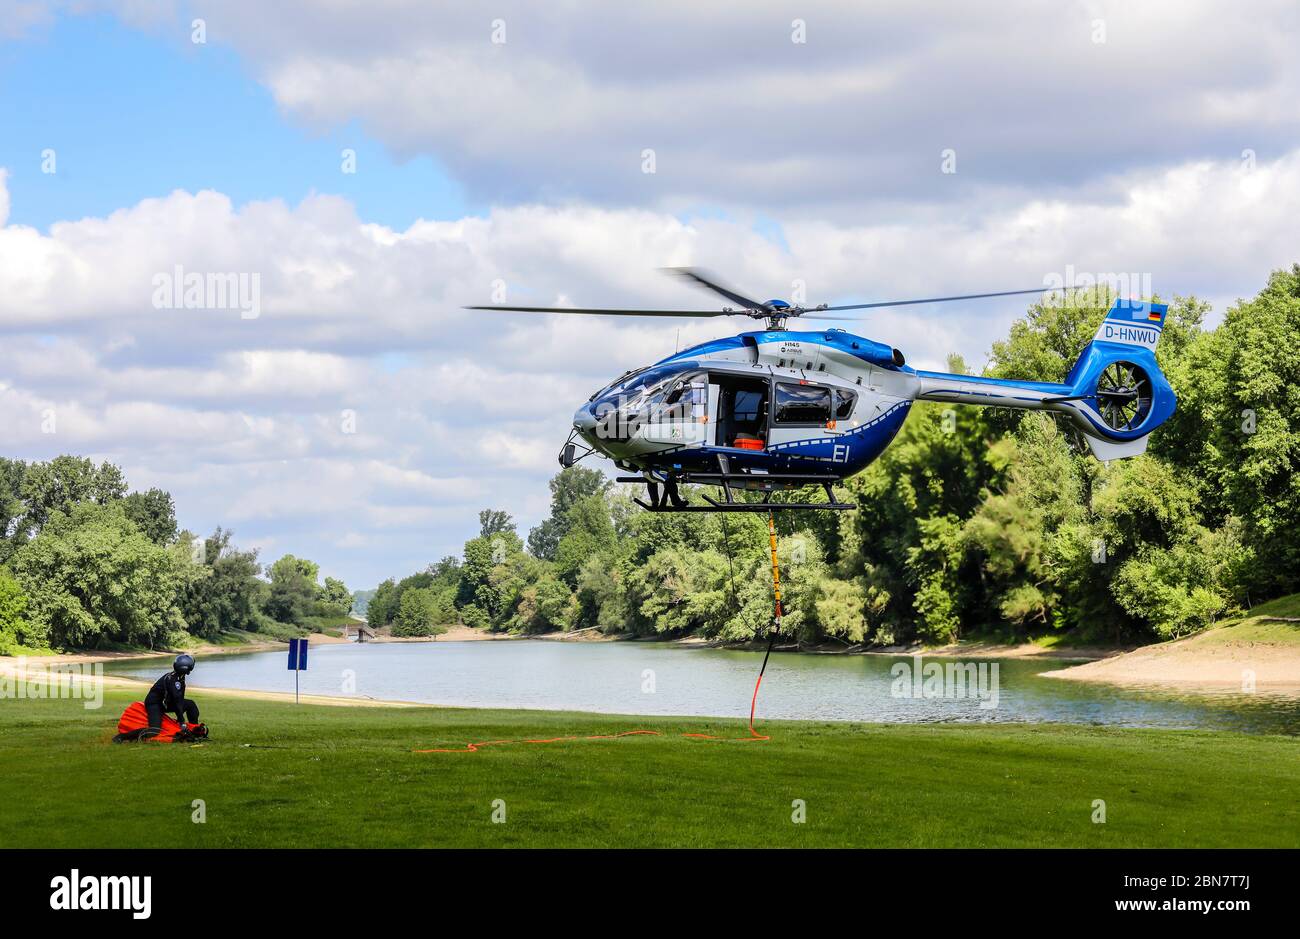 Duesseldorf, North Rhine-Westphalia, Germany - Helicopter Airbus H145 of the police flying squadron during an exercise with the new 820 liter fire-fig Stock Photo